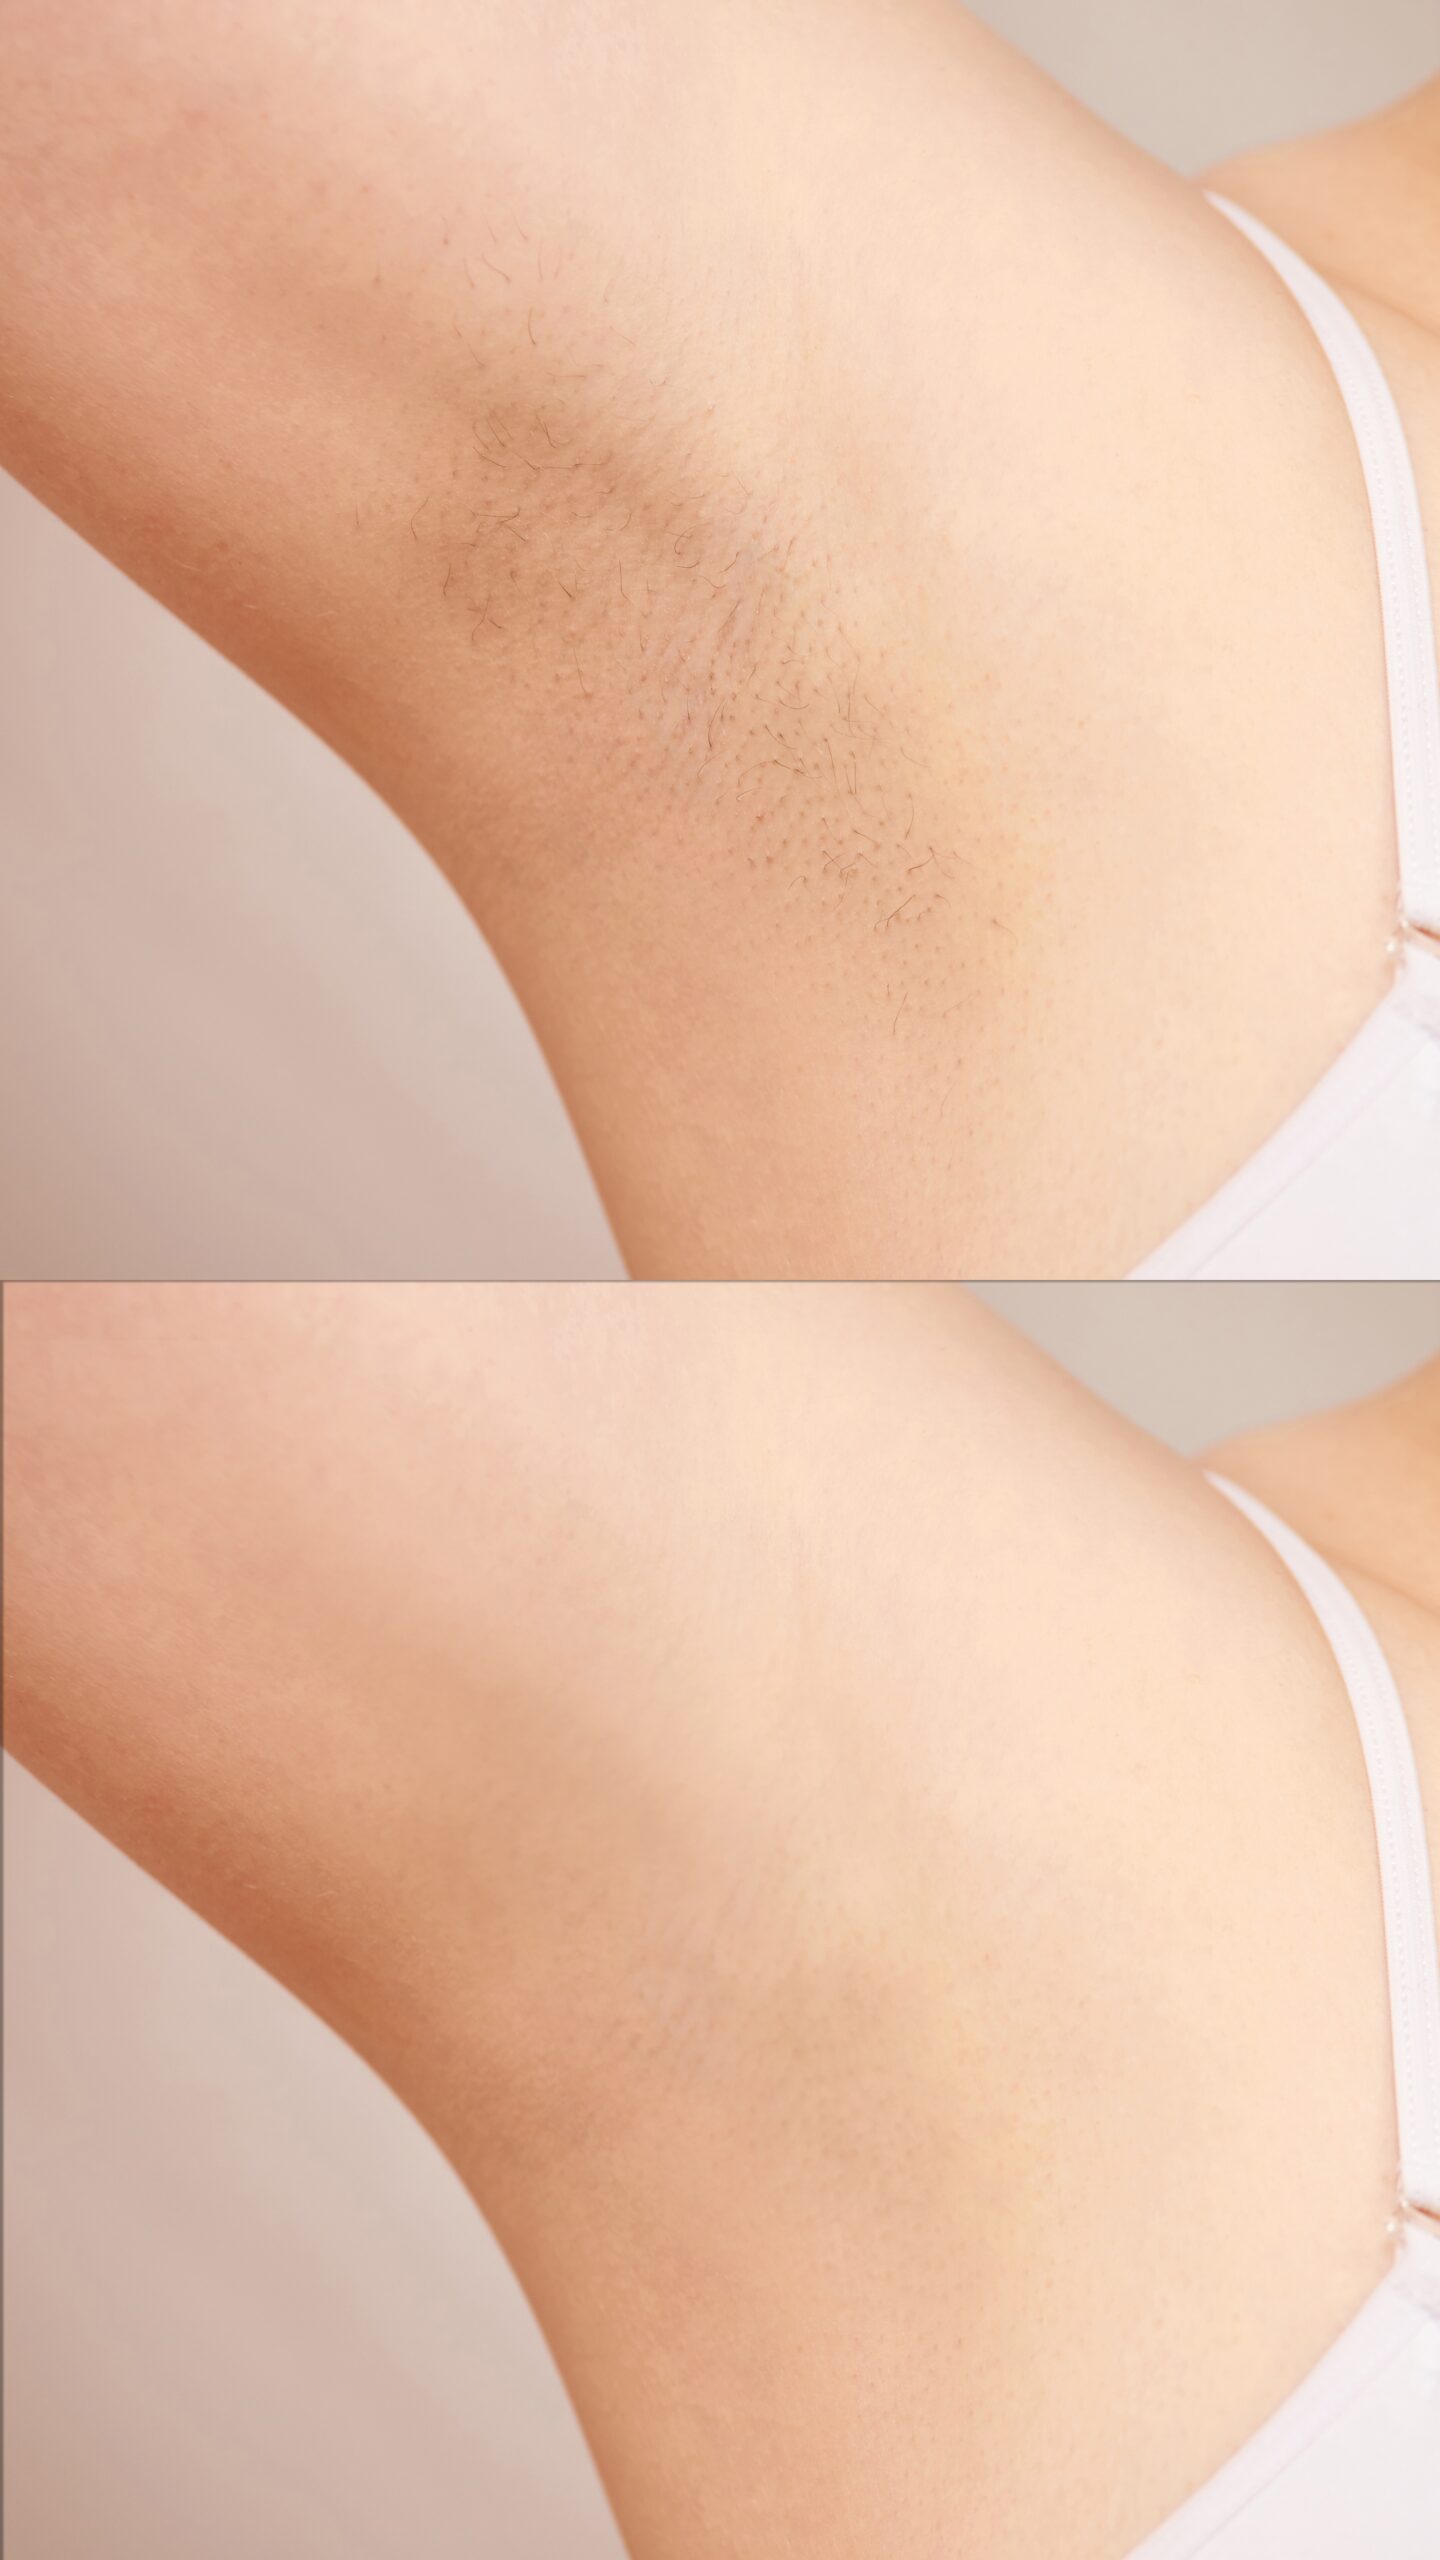 Girl underarm. White woman armpit. Before and after epilation. Wax depilation result. Laser hair removal. sugaring spa procedure